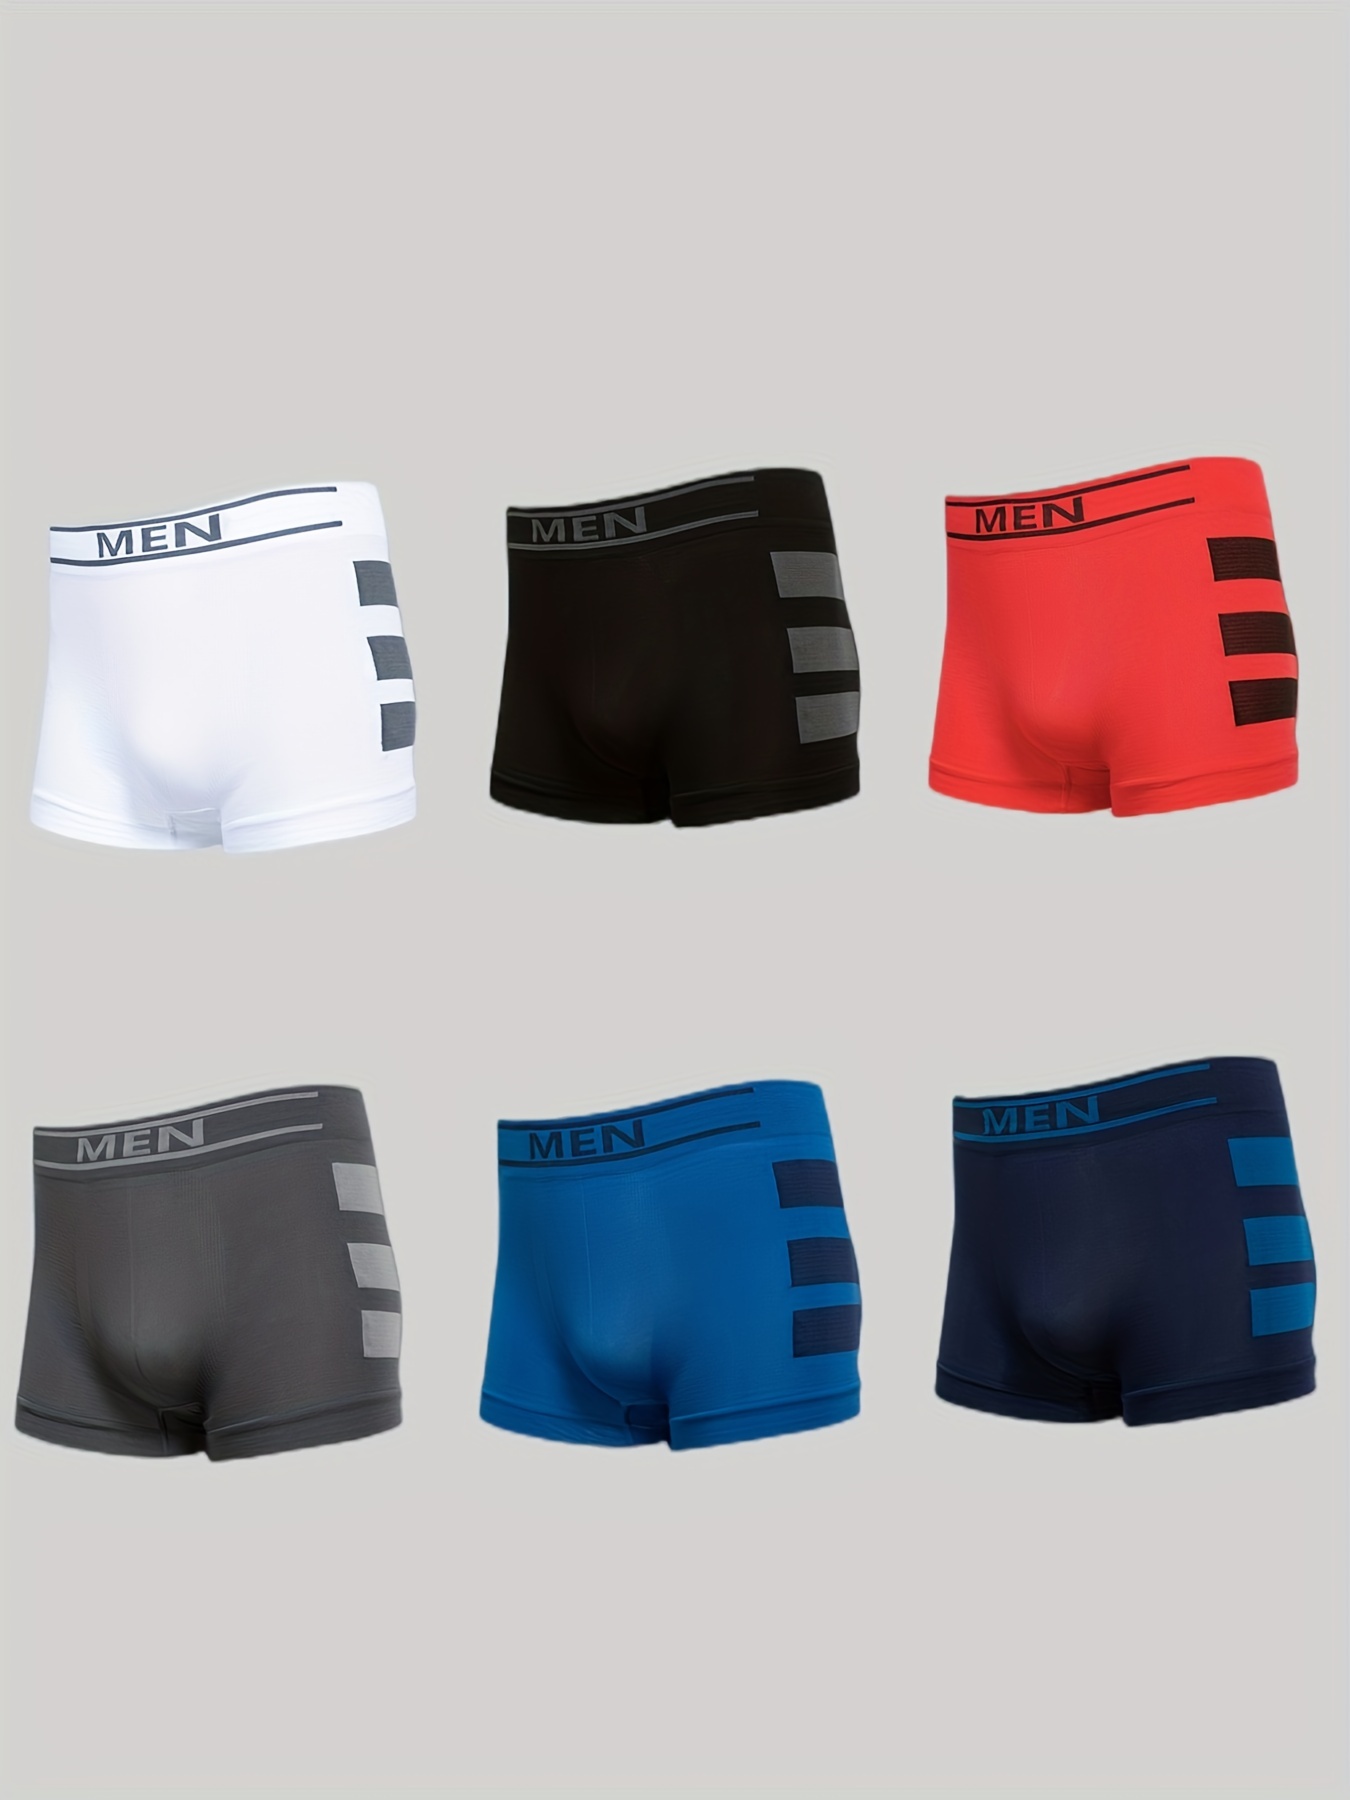 Fashion Men's Solid Cotton Underwear Loose Sports Boxer Shorts Breathable  Trunks Solid Color Lingerie Youth Convex Pouch Panties